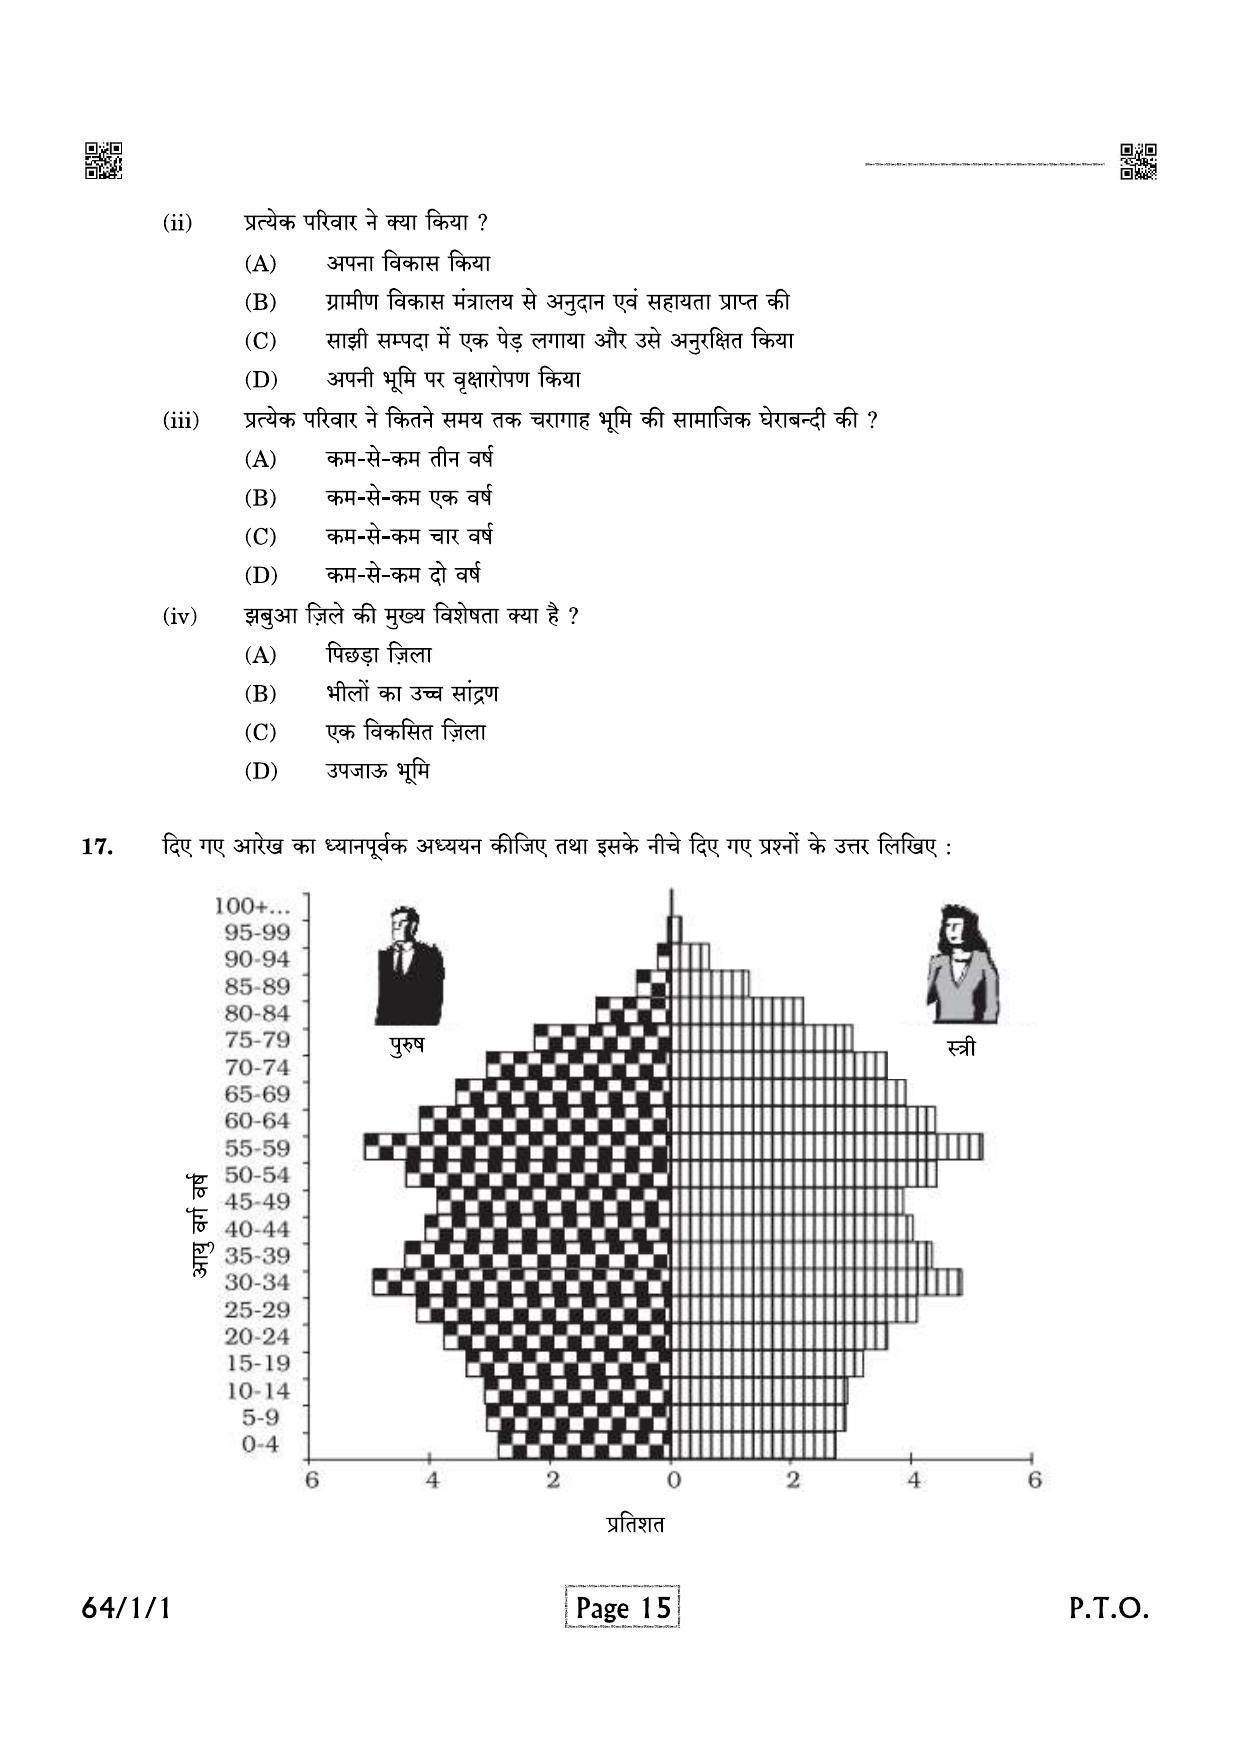 CBSE Class 12 QP_029_Geography 2021 Compartment Question Paper - Page 15